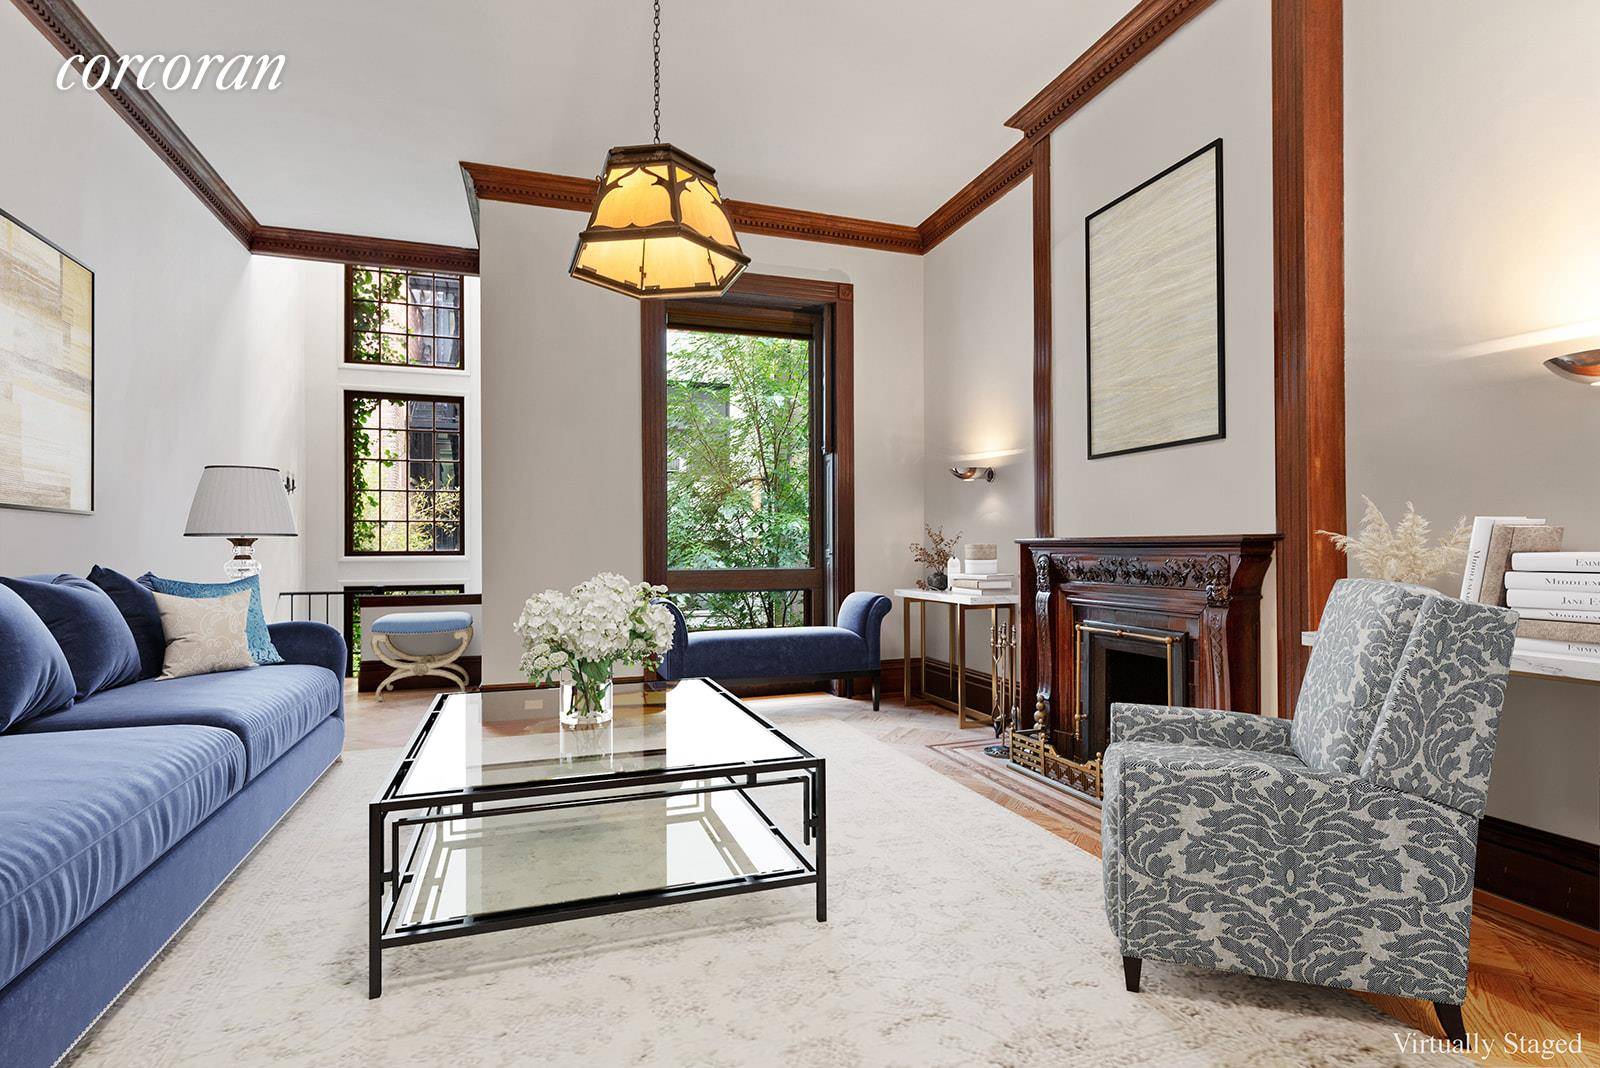 This prime Central Park block single family ELEVATOR townhouse at 51 West 73rd Street is a rare opportunity to rent one of the few Queen Anne houses in NYC.